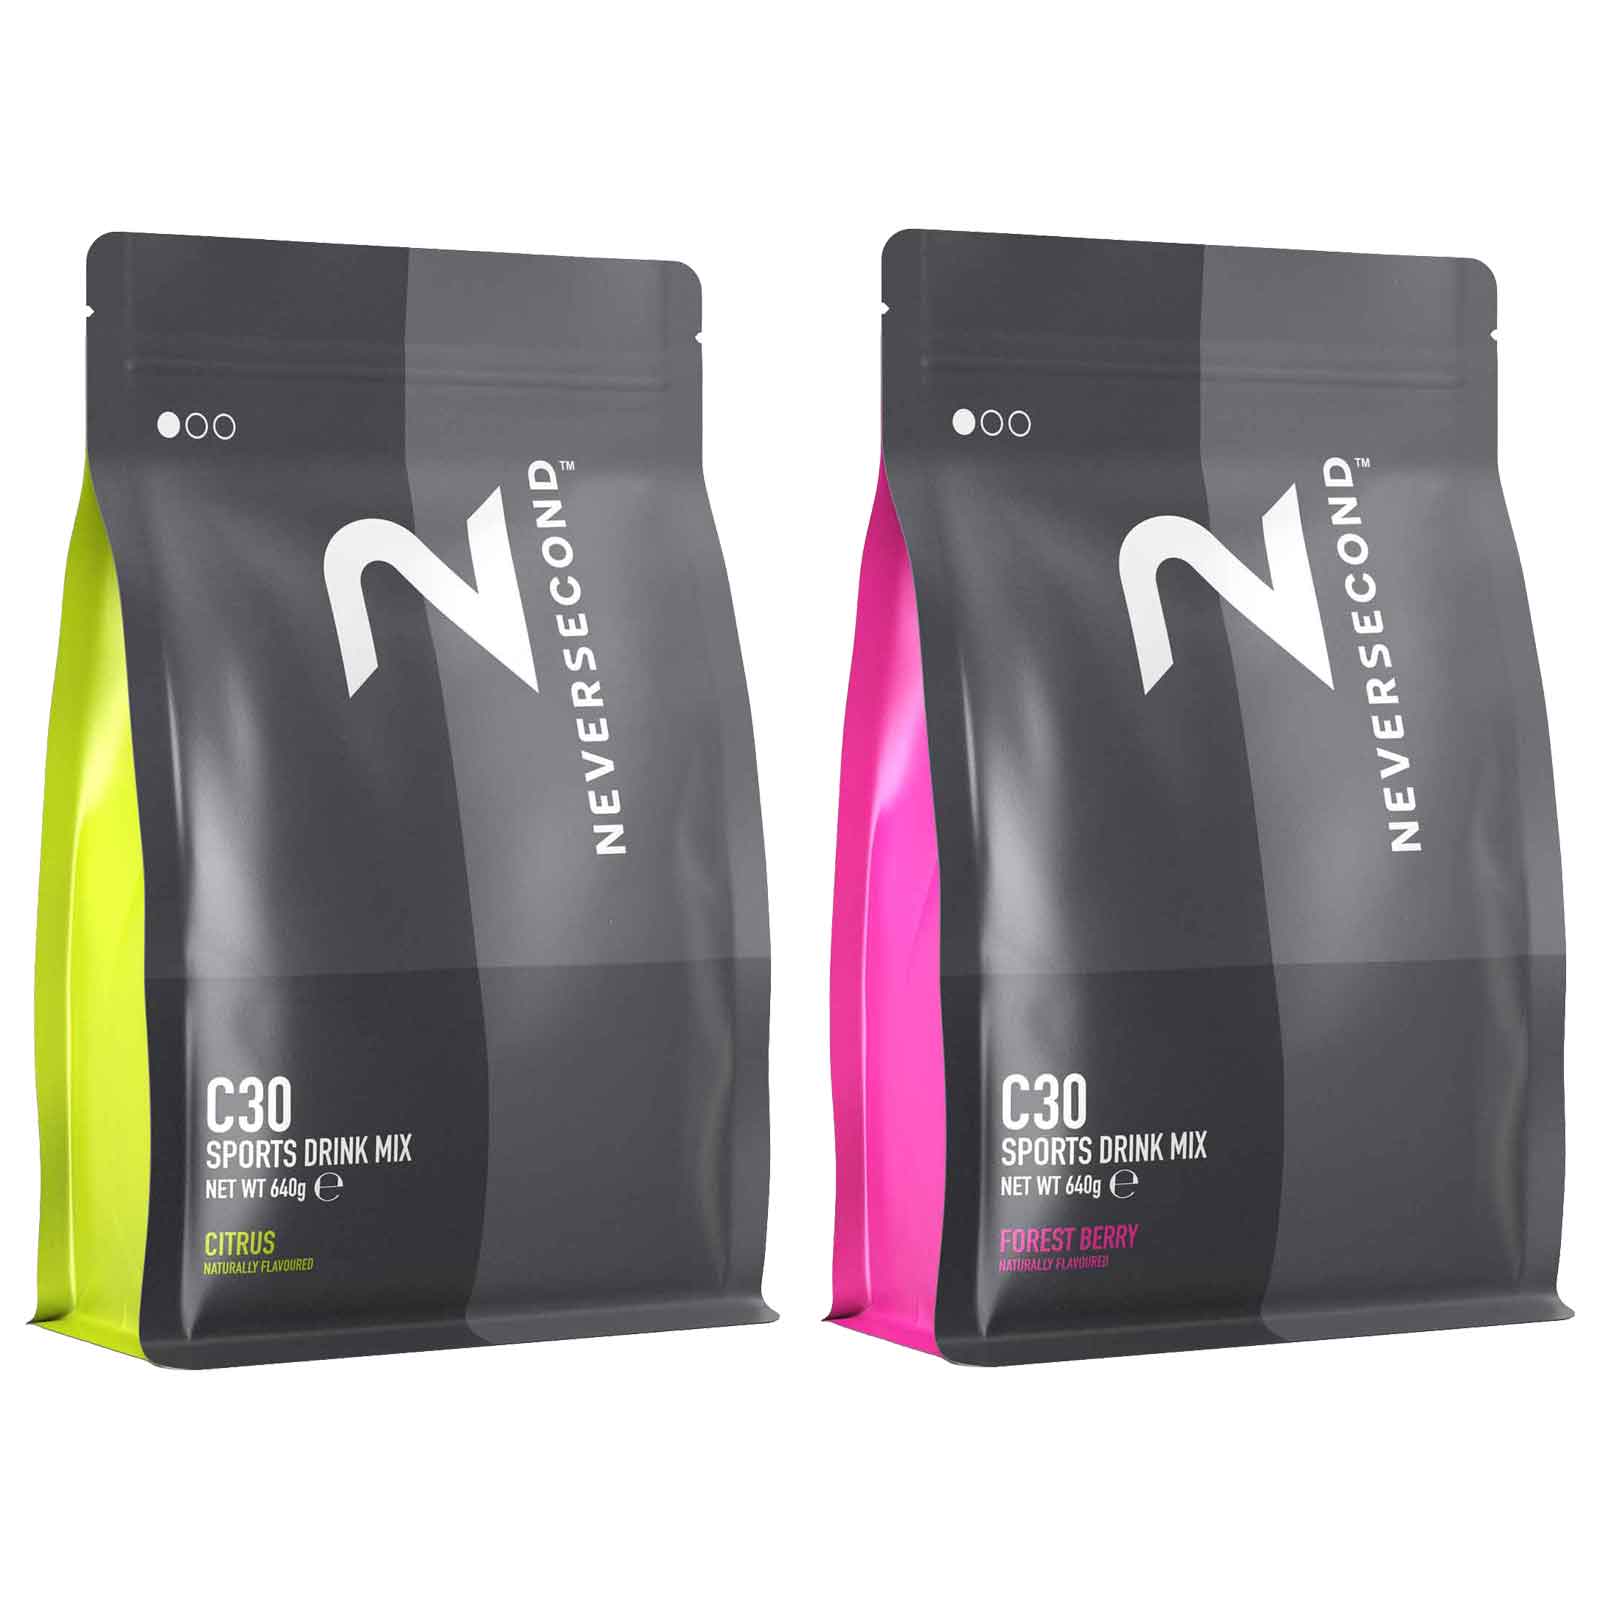 Productfoto van Neversecond C30 Sports Drink Mix - Carbohydrate Beverage Powder - 640g